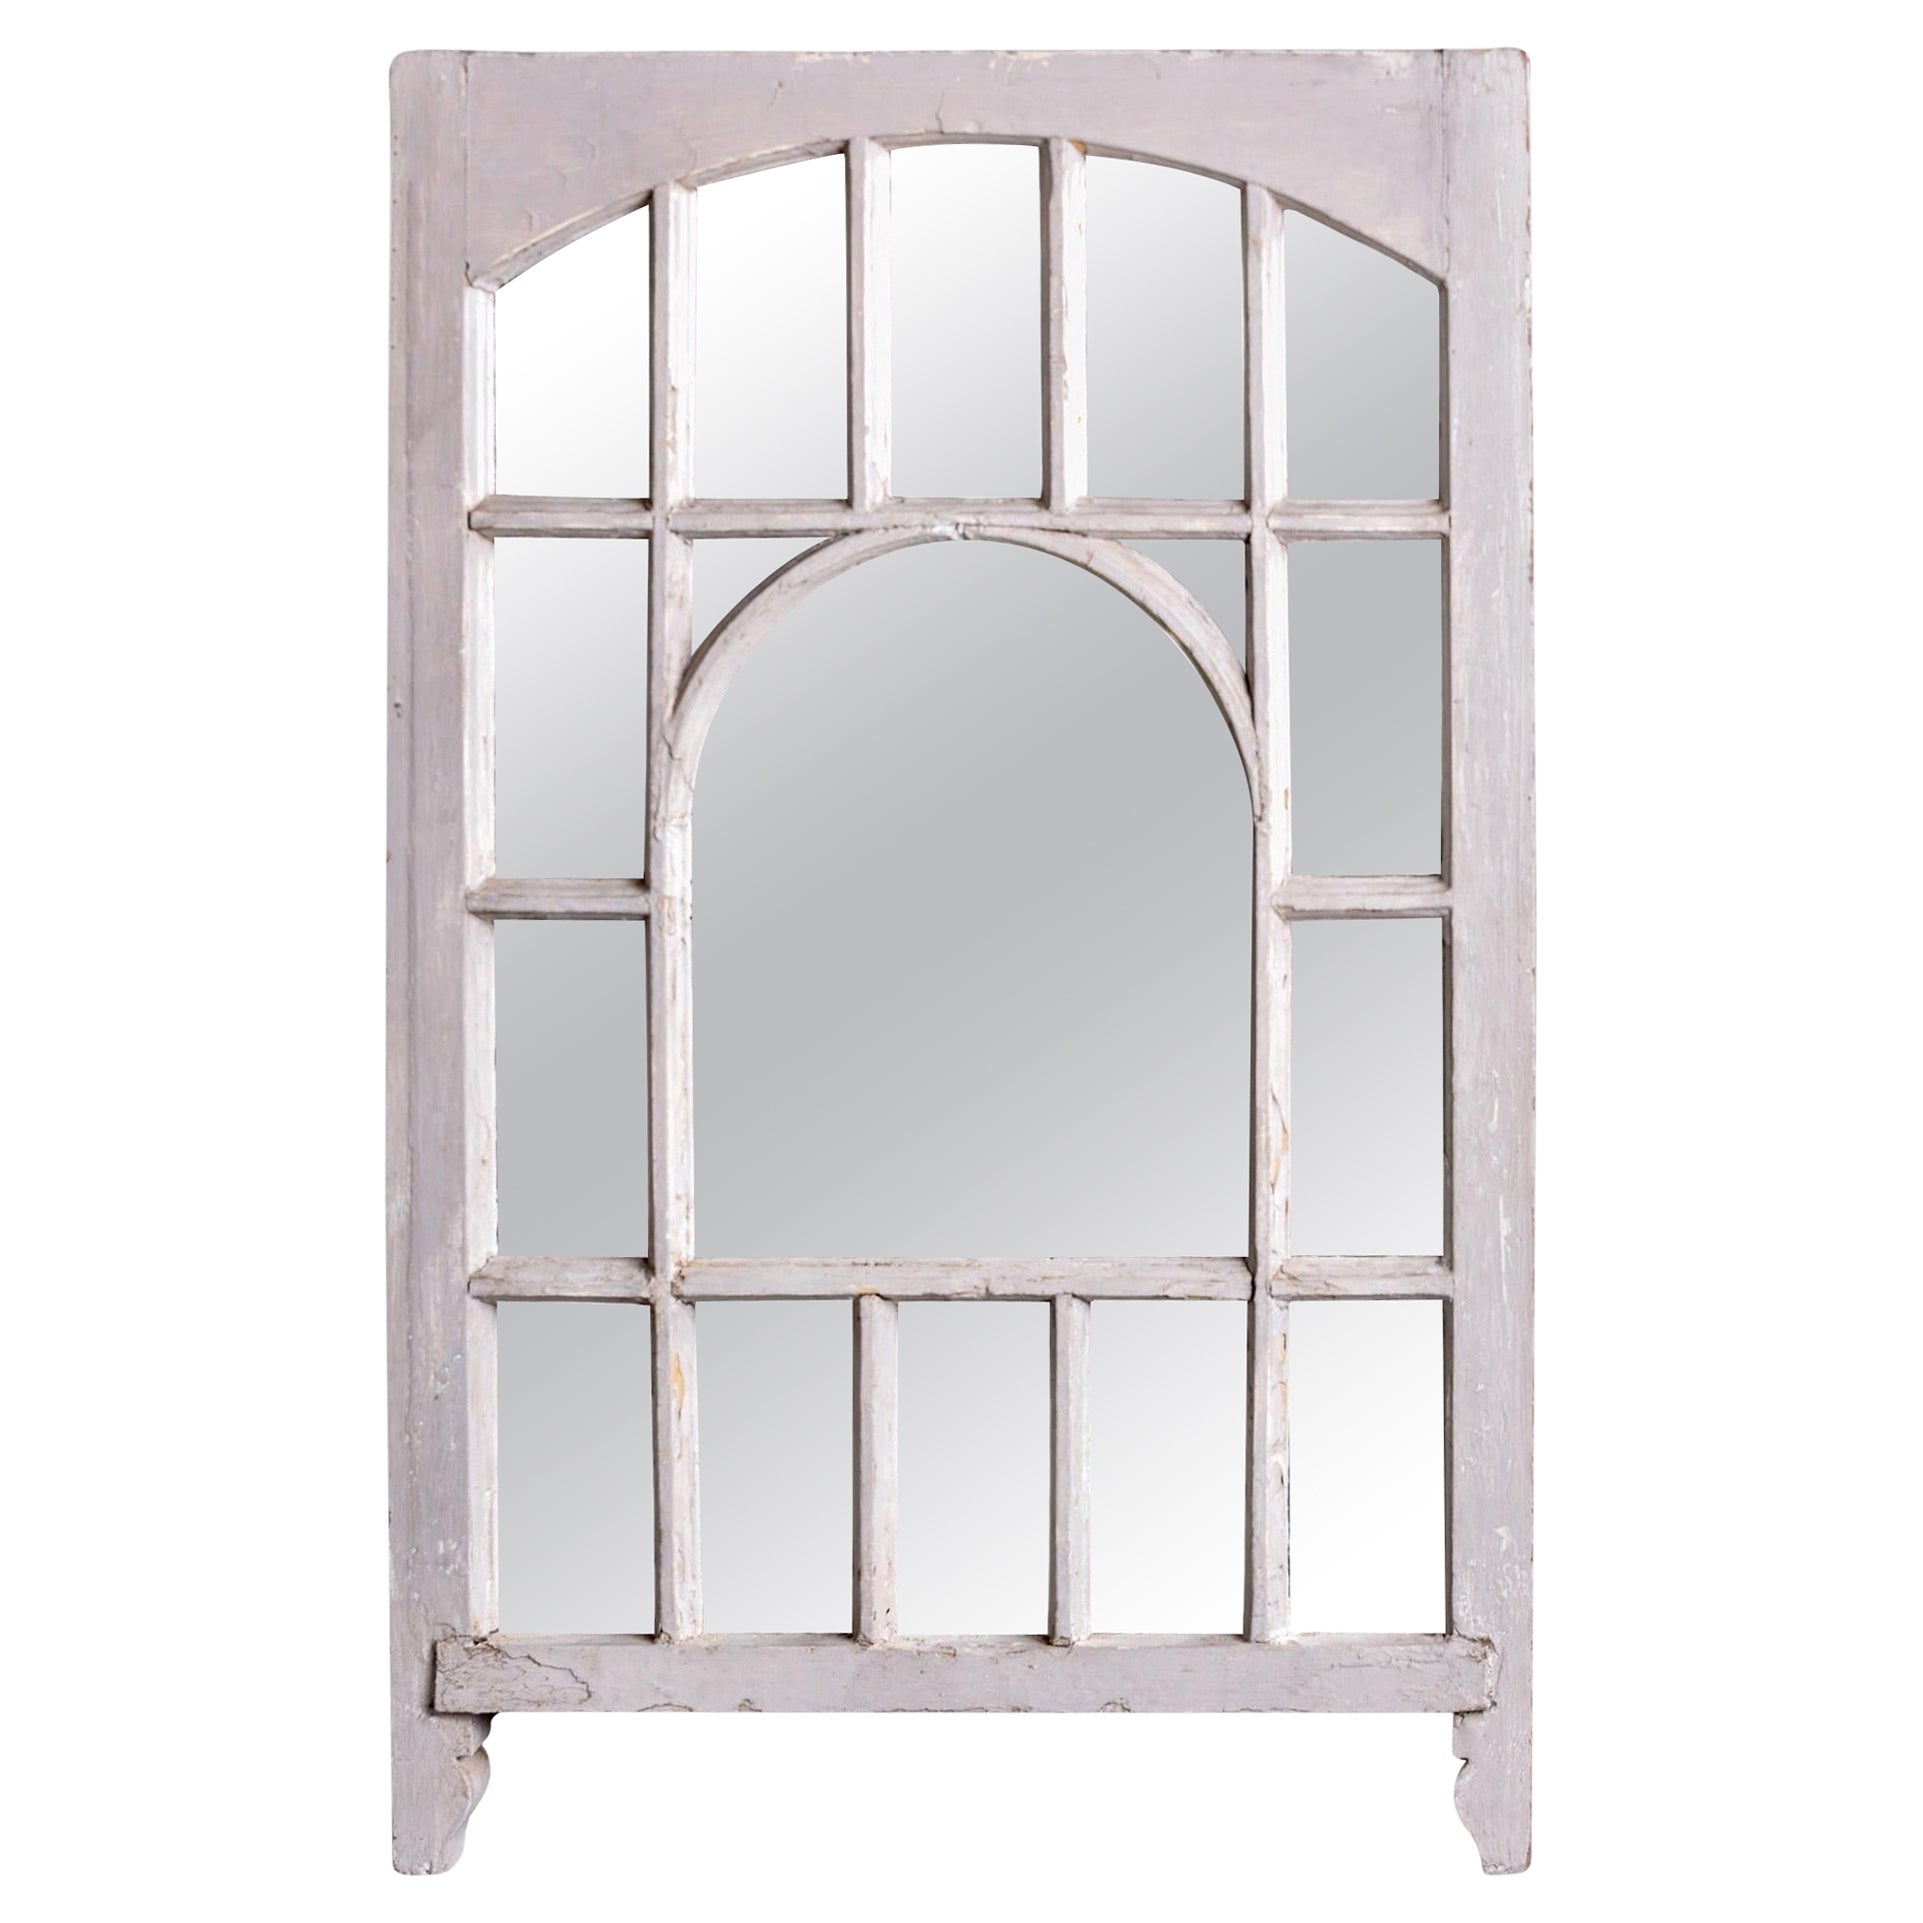 Early 20th C English White Painted Window Frame Mirror For Sale